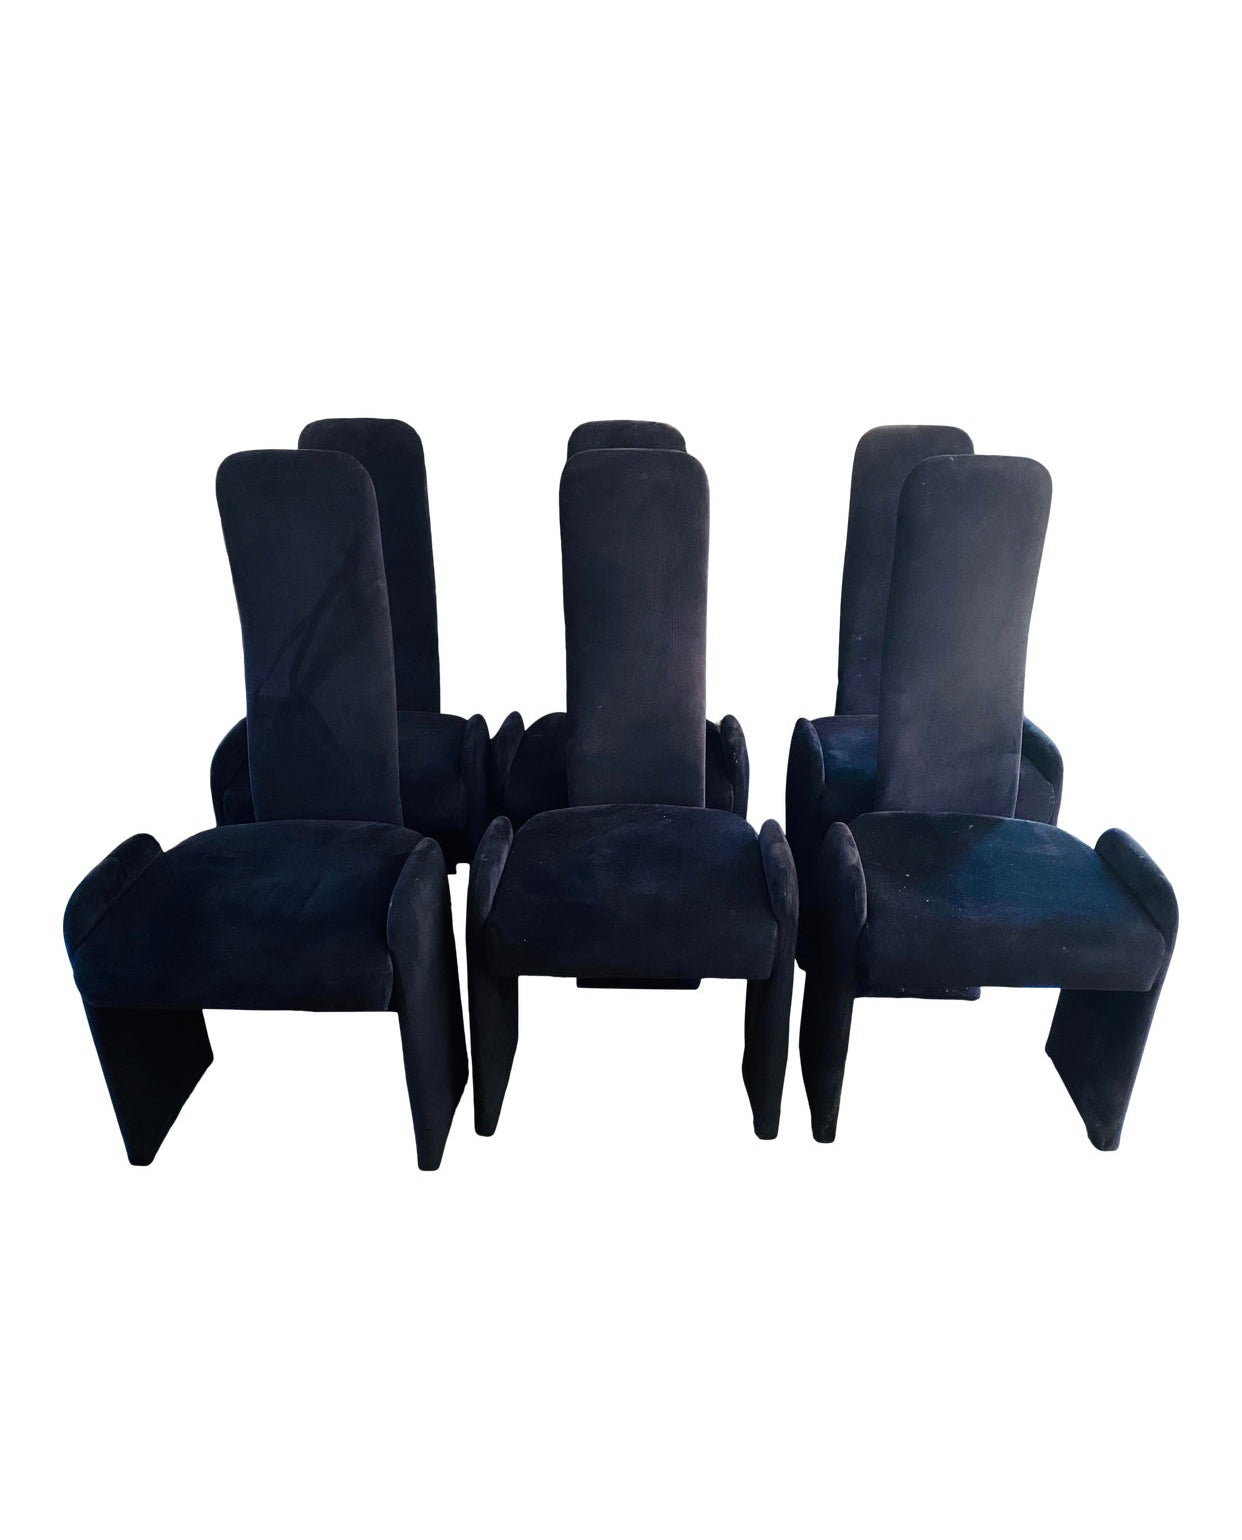 1980s Saporiti-Style Ultra Suede High Back Dining Chairs - Set of 6